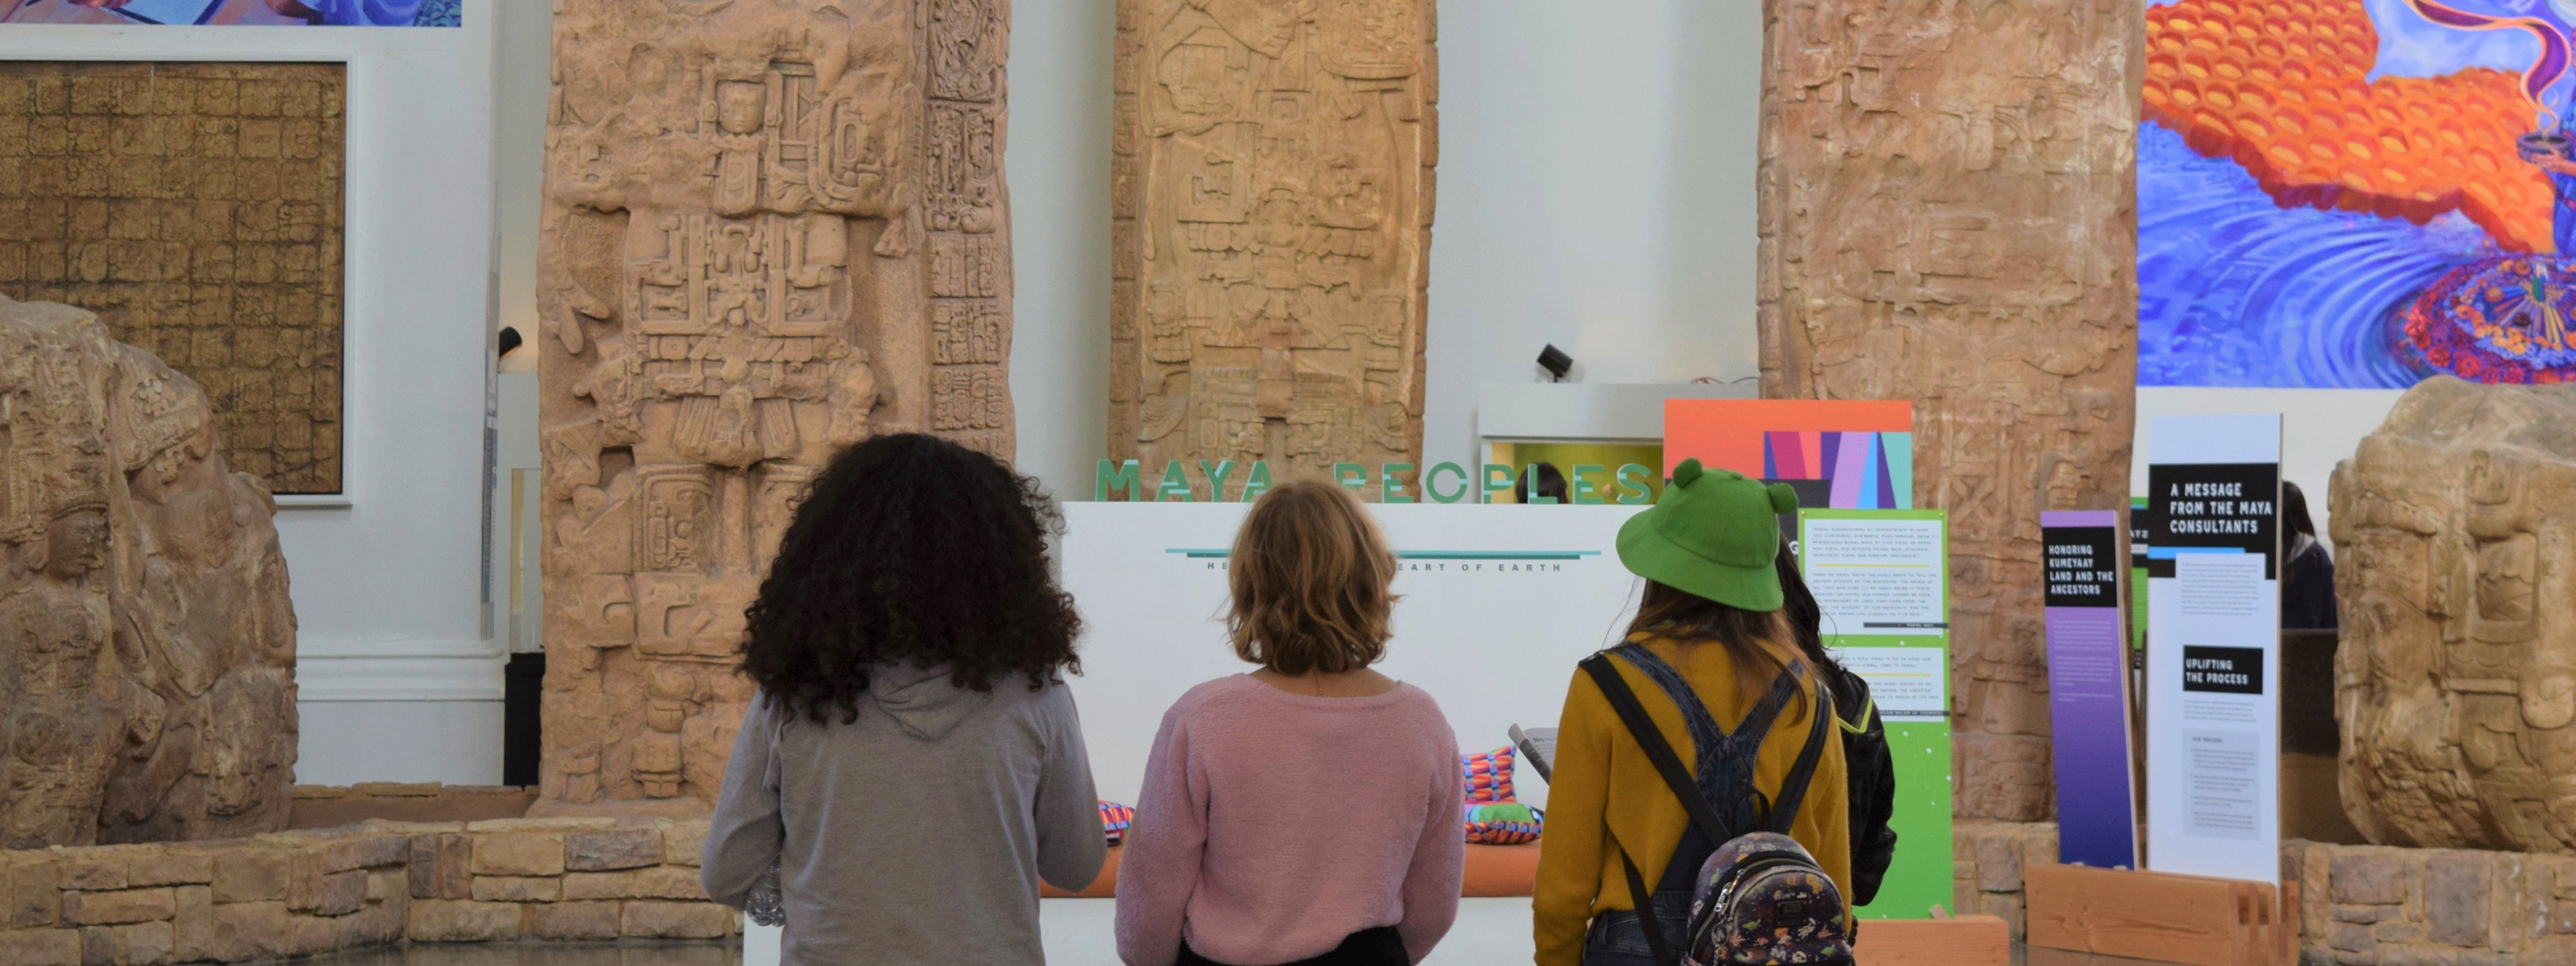 Three young adult visitors walk toward the "Maya Peoples: Heart of Sky, Heart of Earth" exhibit during a group visit to the Museum.